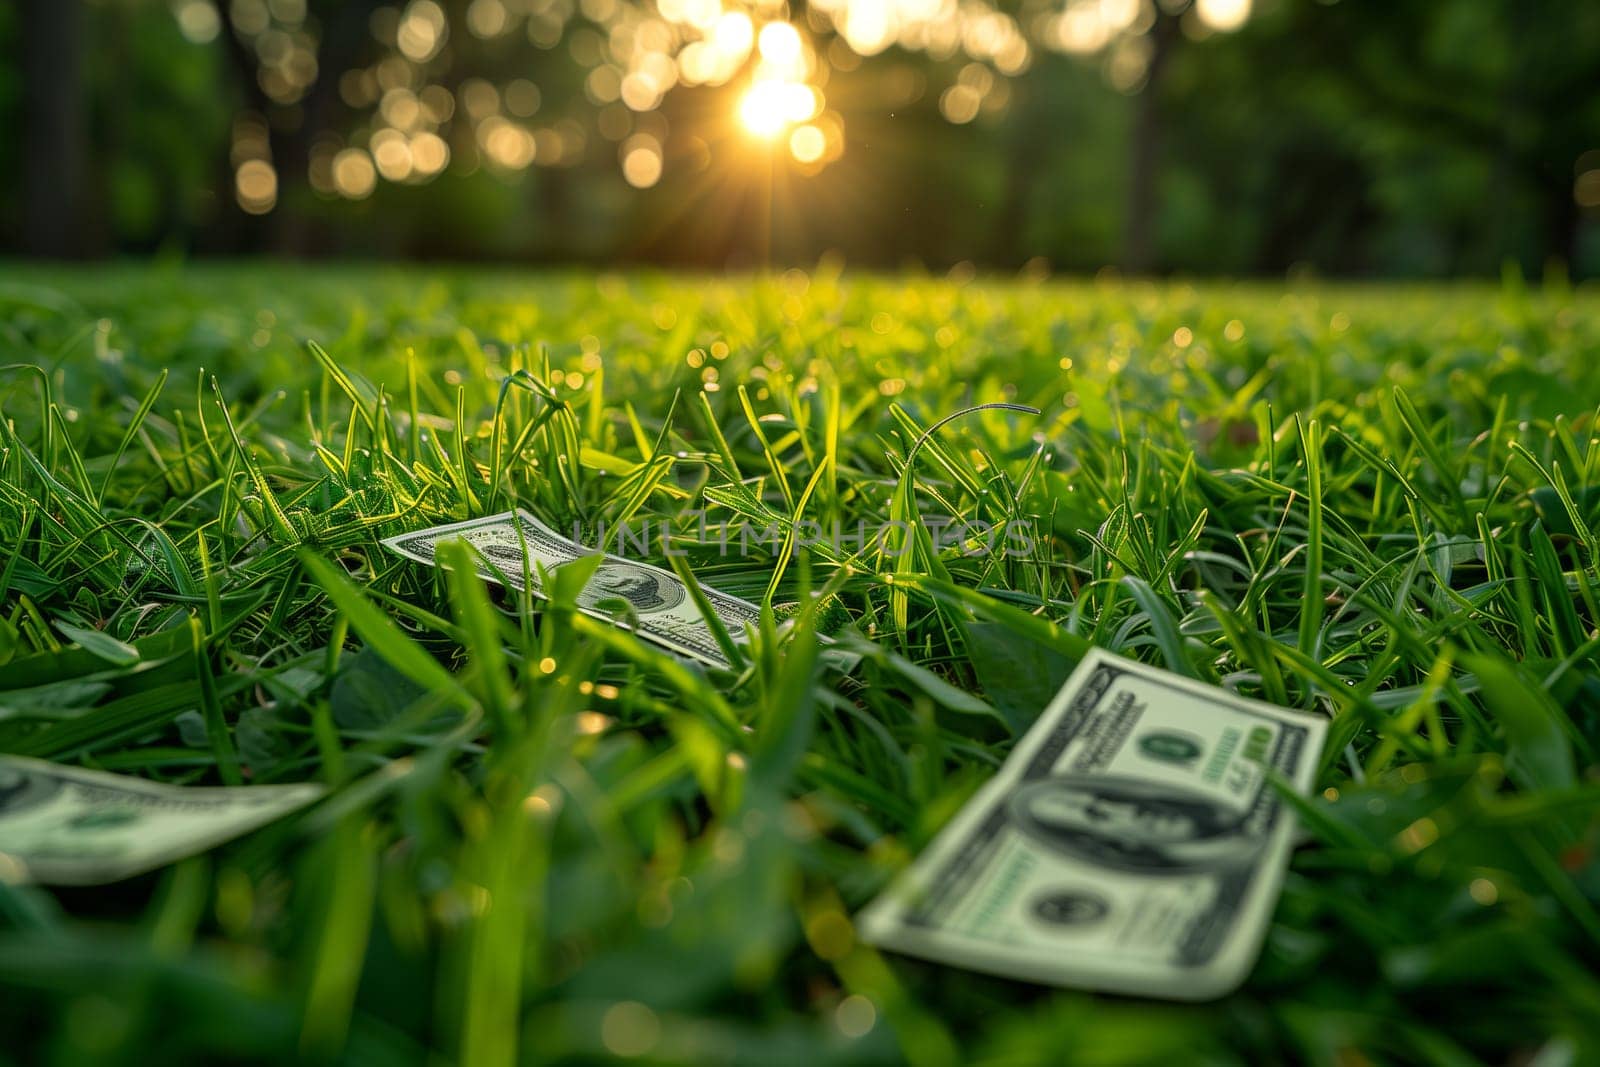 A dollar bill rests on a vibrant grassy field, surrounded by lush terrestrial plants, creating a beautiful natural landscape that invites people to enjoy the meadow and trees in the background